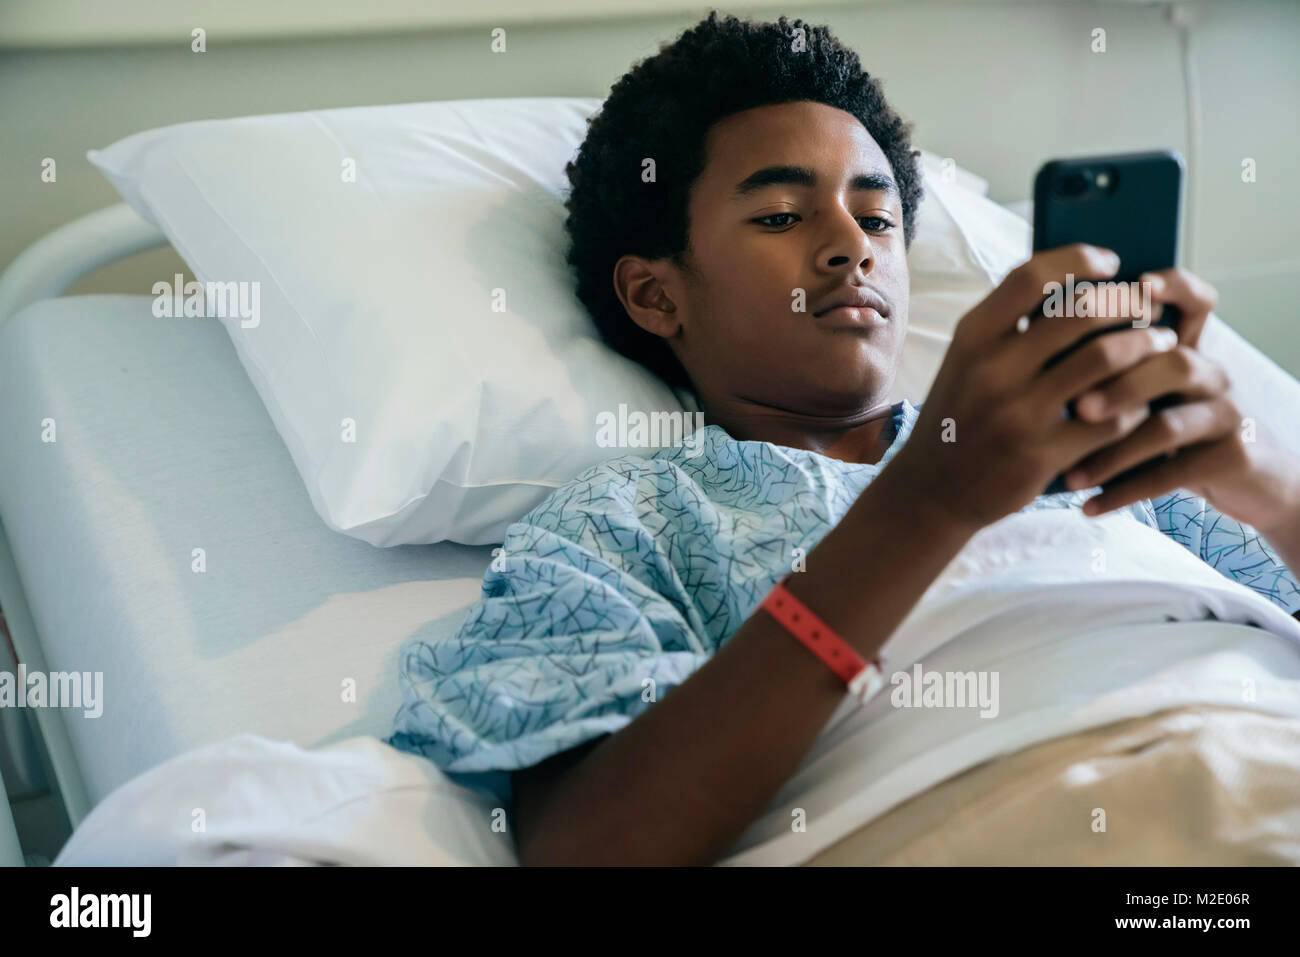 Black boy laying in hospital bed texting on cell phone Stock Photo